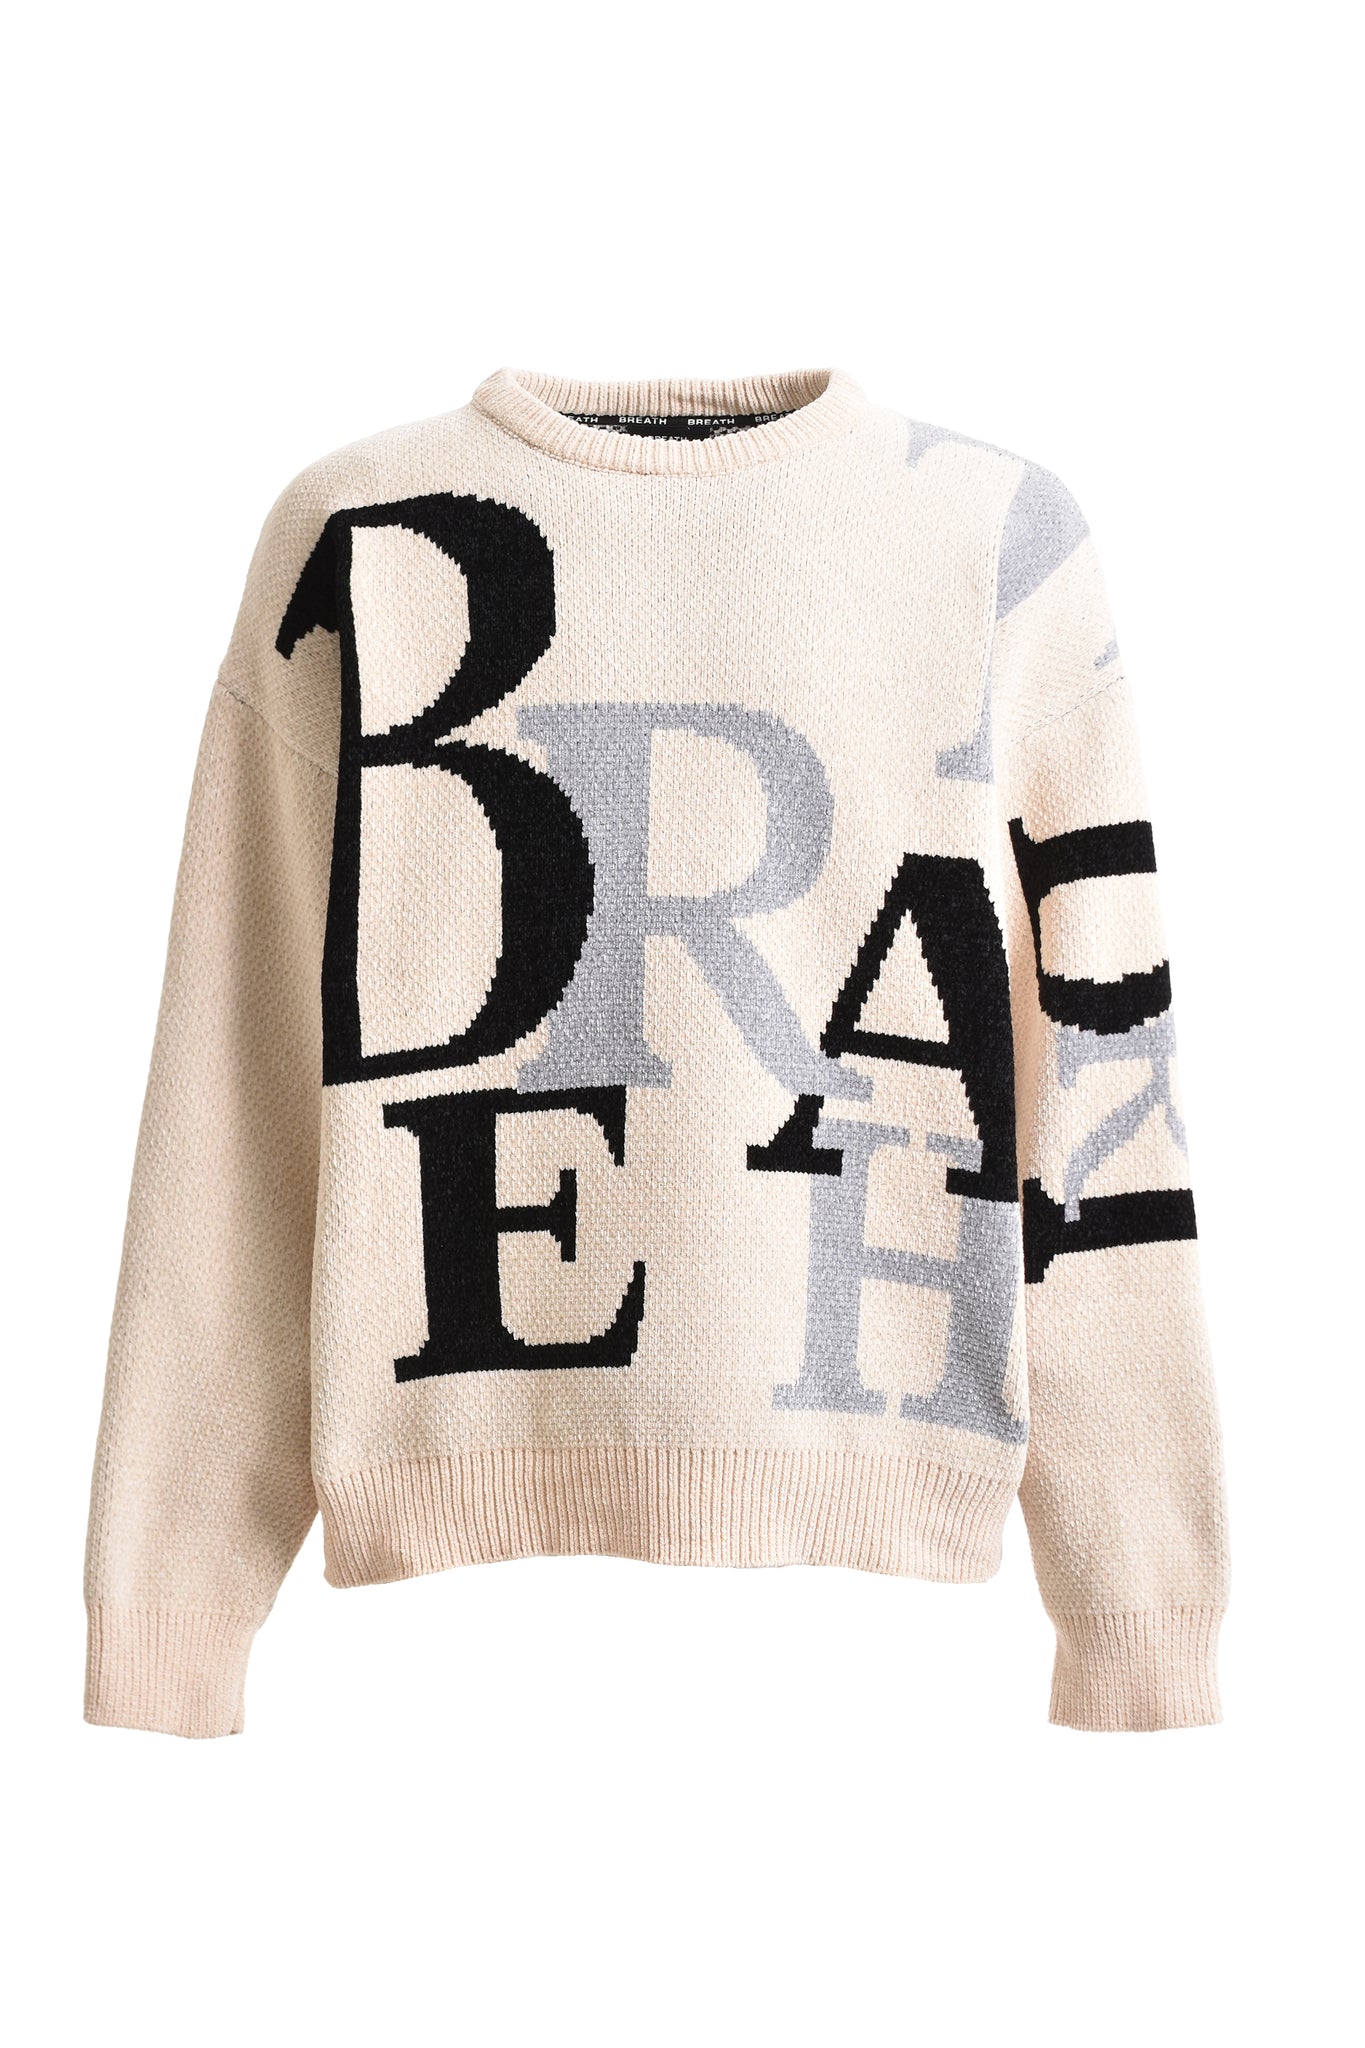 LOGO WORDS MALL KNIT / OFF WHITE